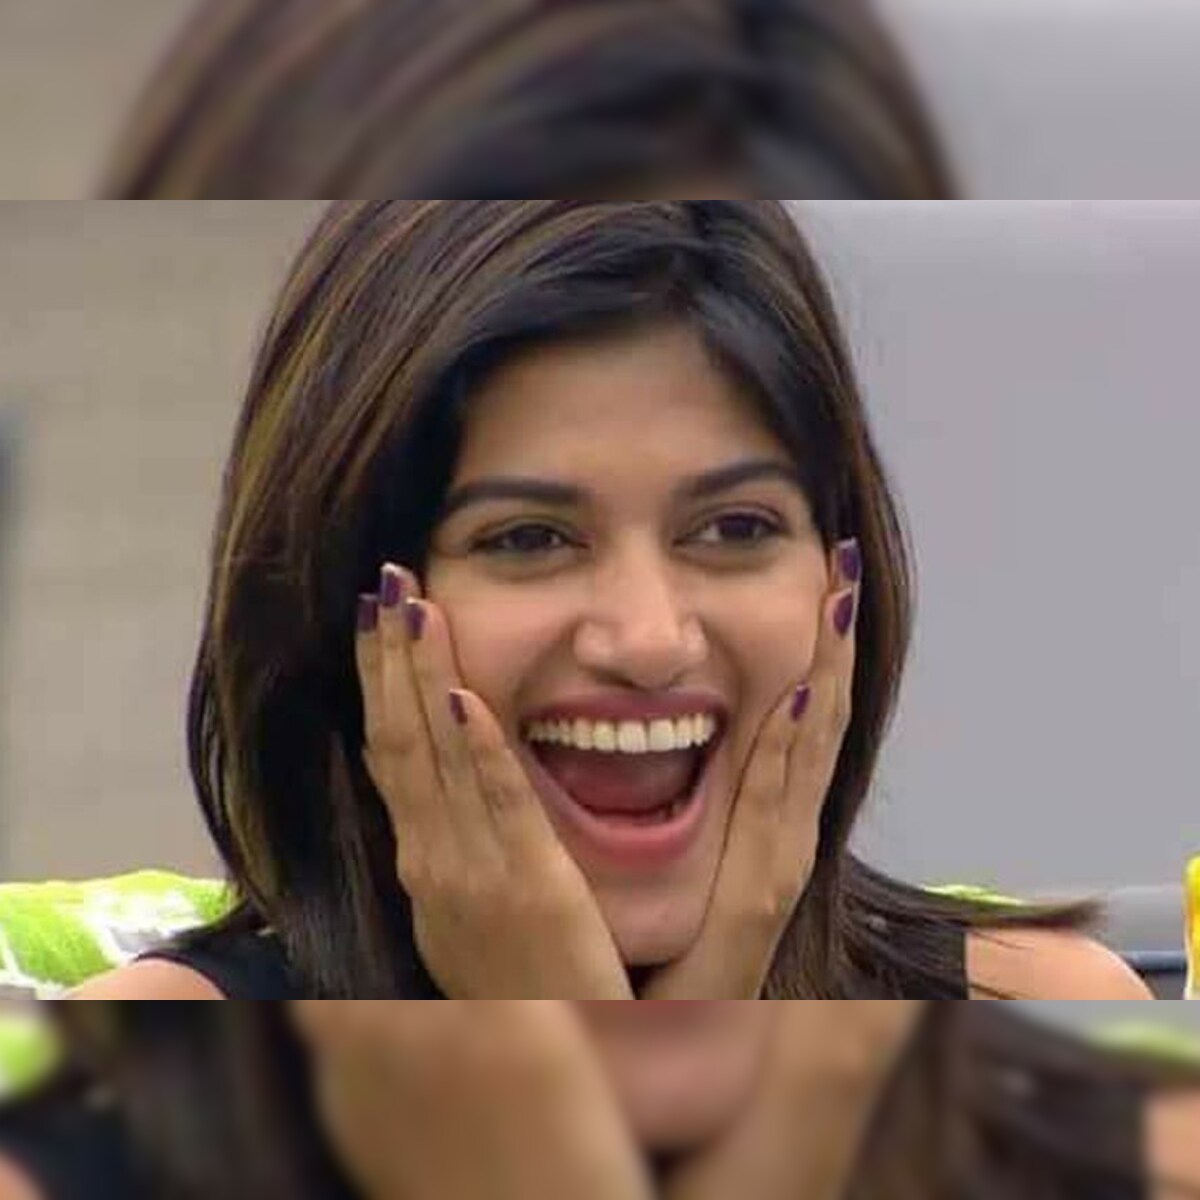 Bigg Boss Tamil: Post Her Exit, Oviya has a Special Message For Fans